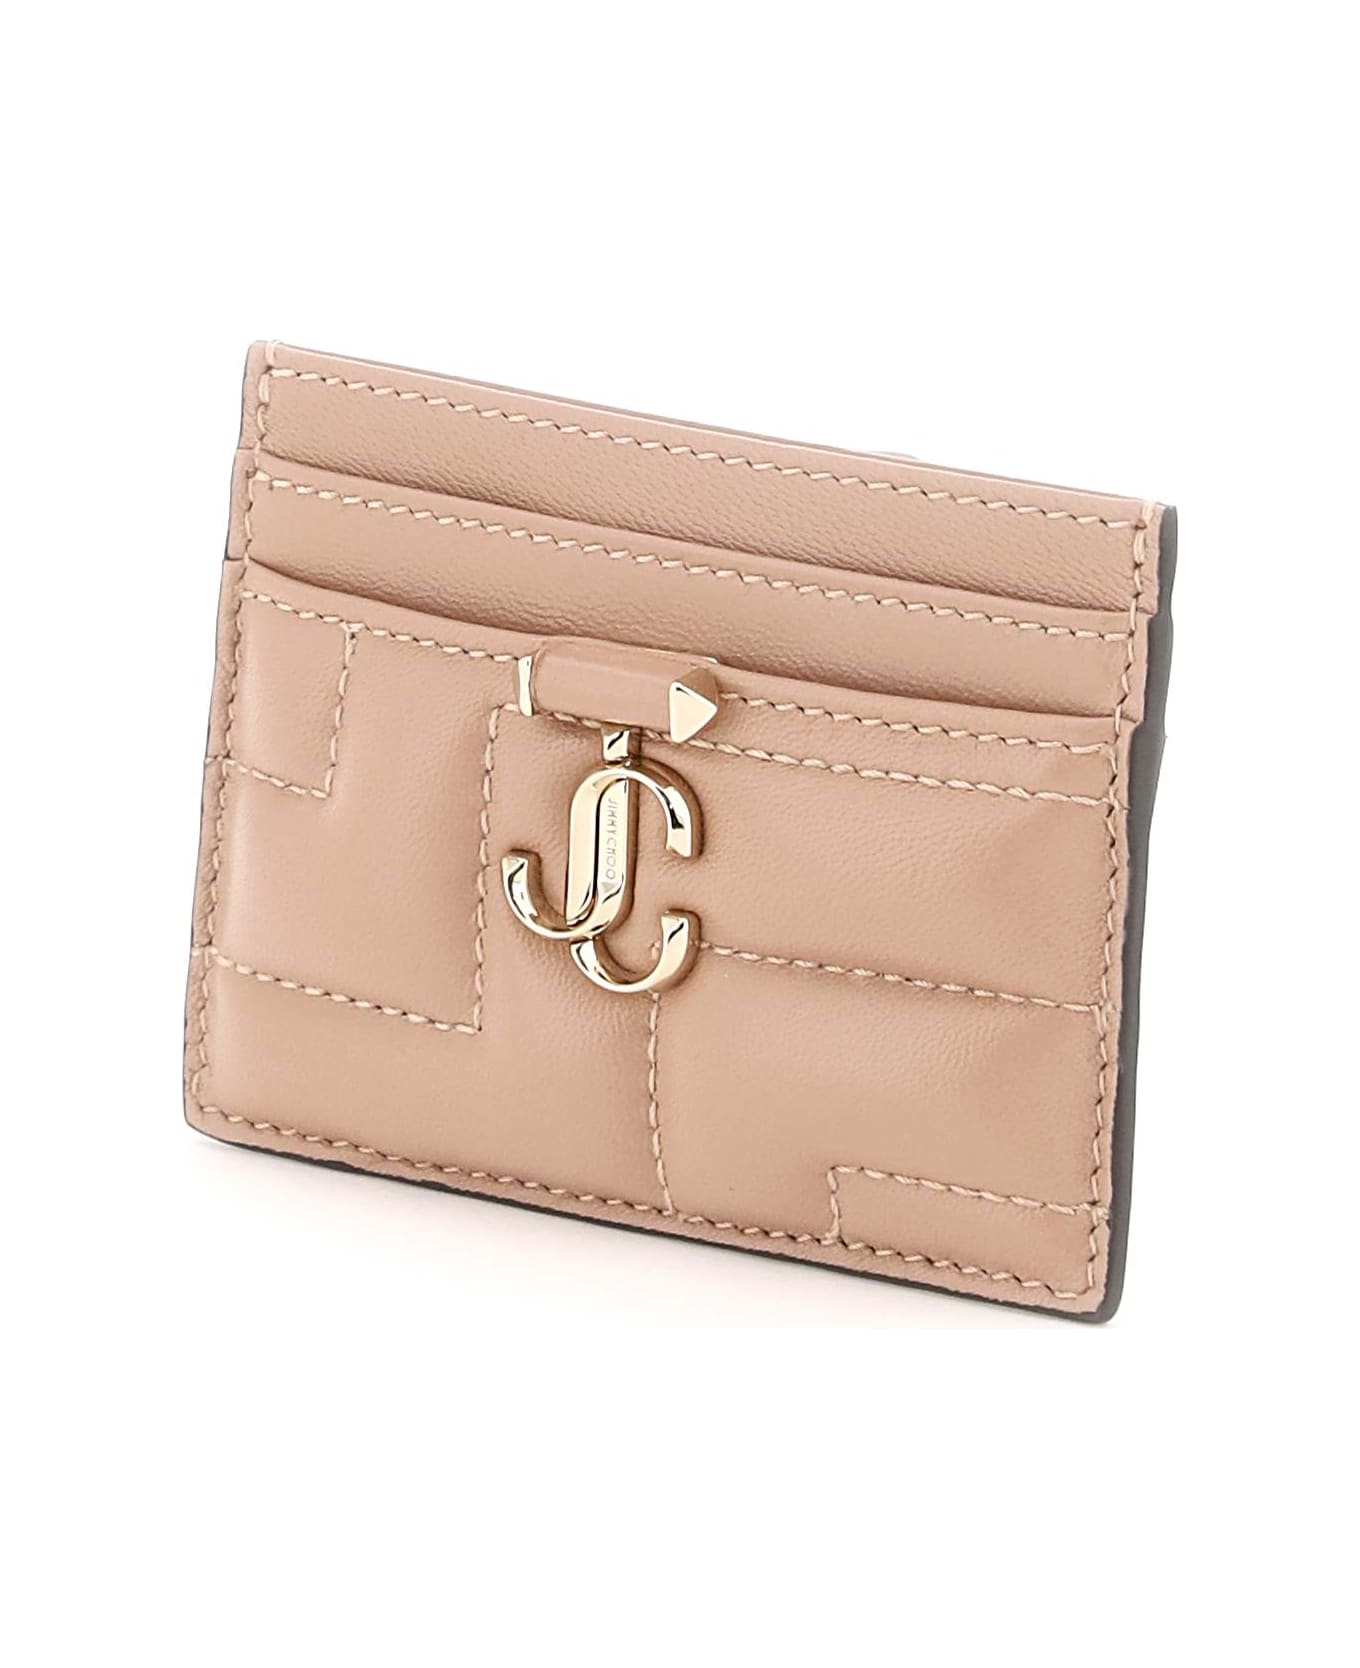 Jimmy Choo Quilted Nappa Leather Card Holder - BALLET PINK LIGHT GOLD (Pink)